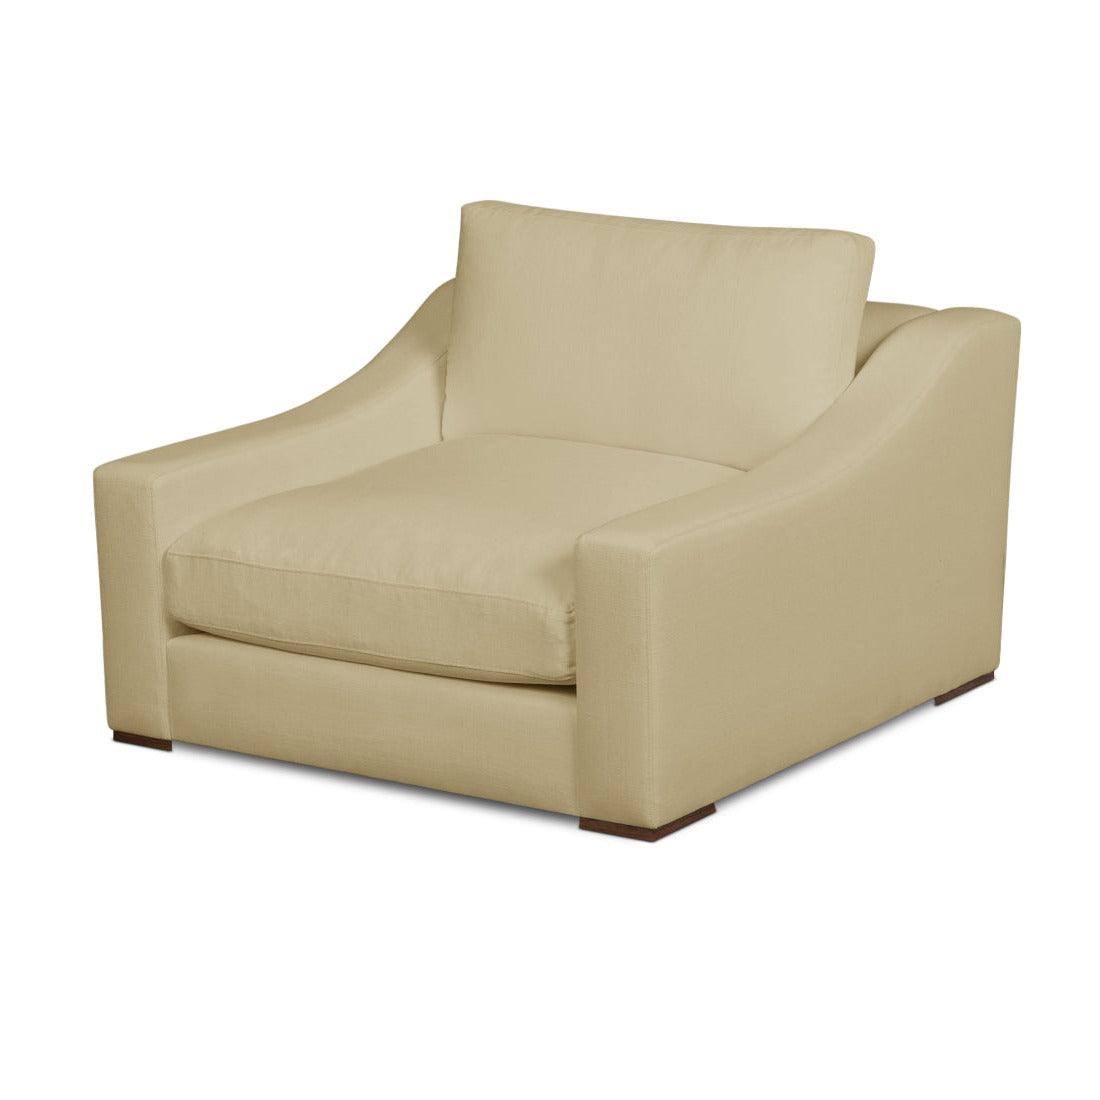 Hilary Stain Resistant Upholstery Club Chair - Uptown Sebastian